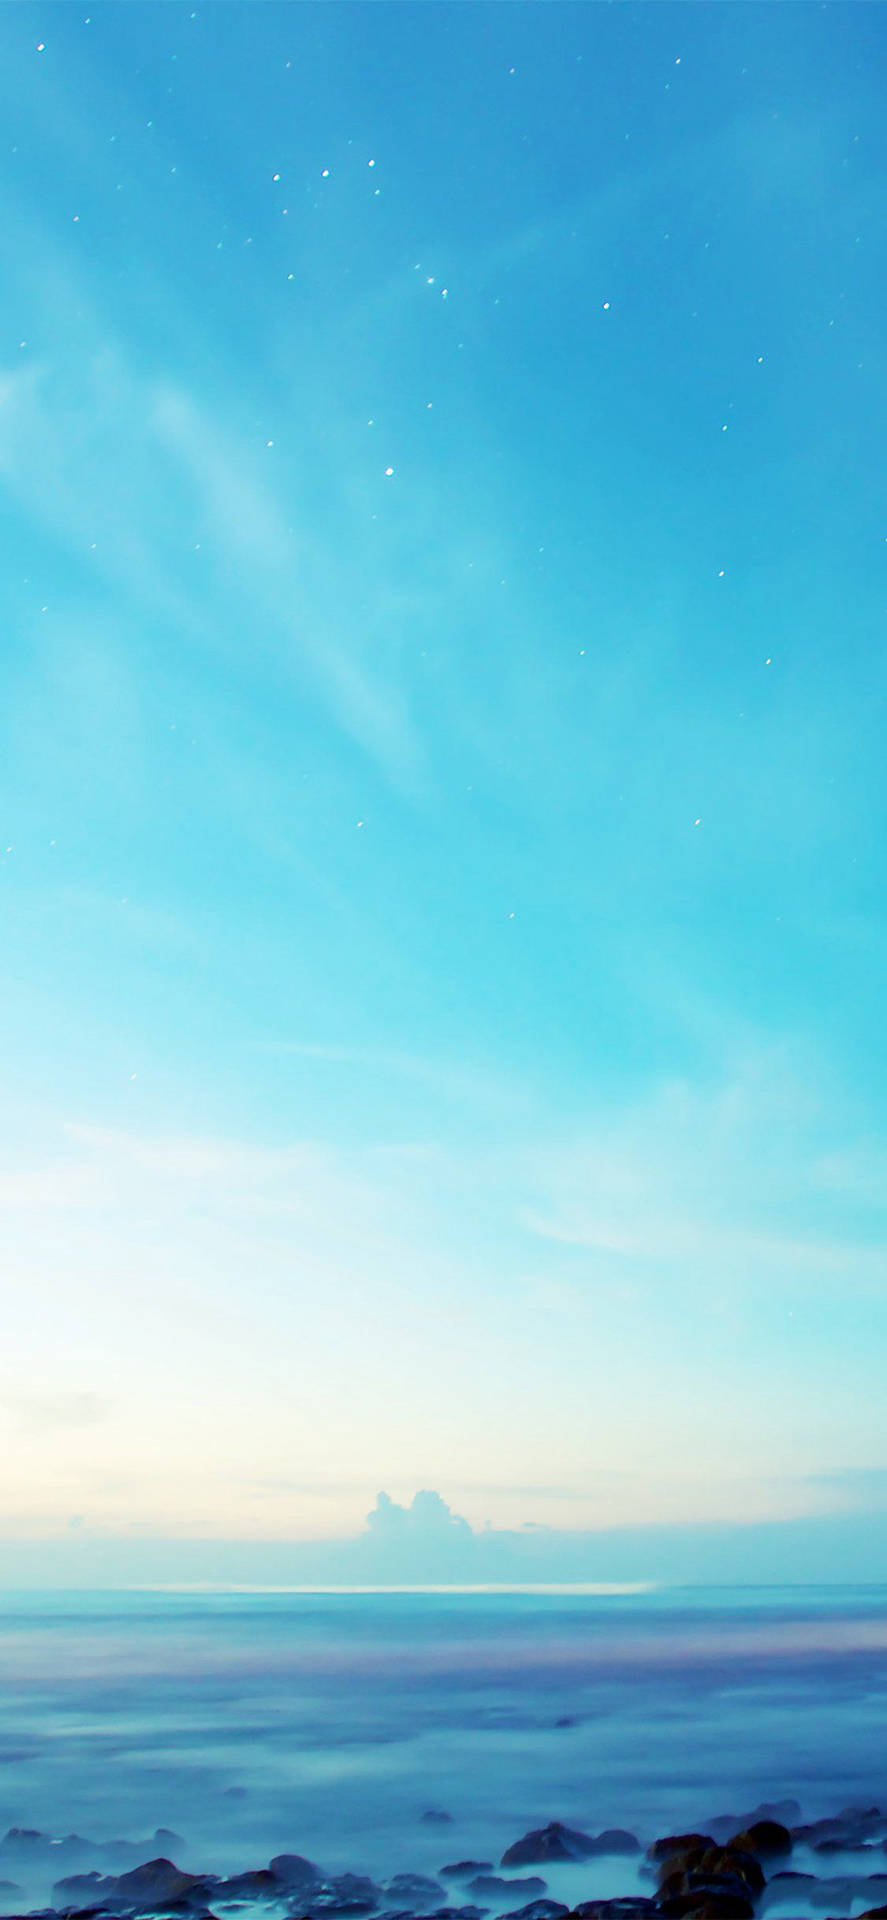 Aesthetic Blue Sky For IPhone Wallpaper